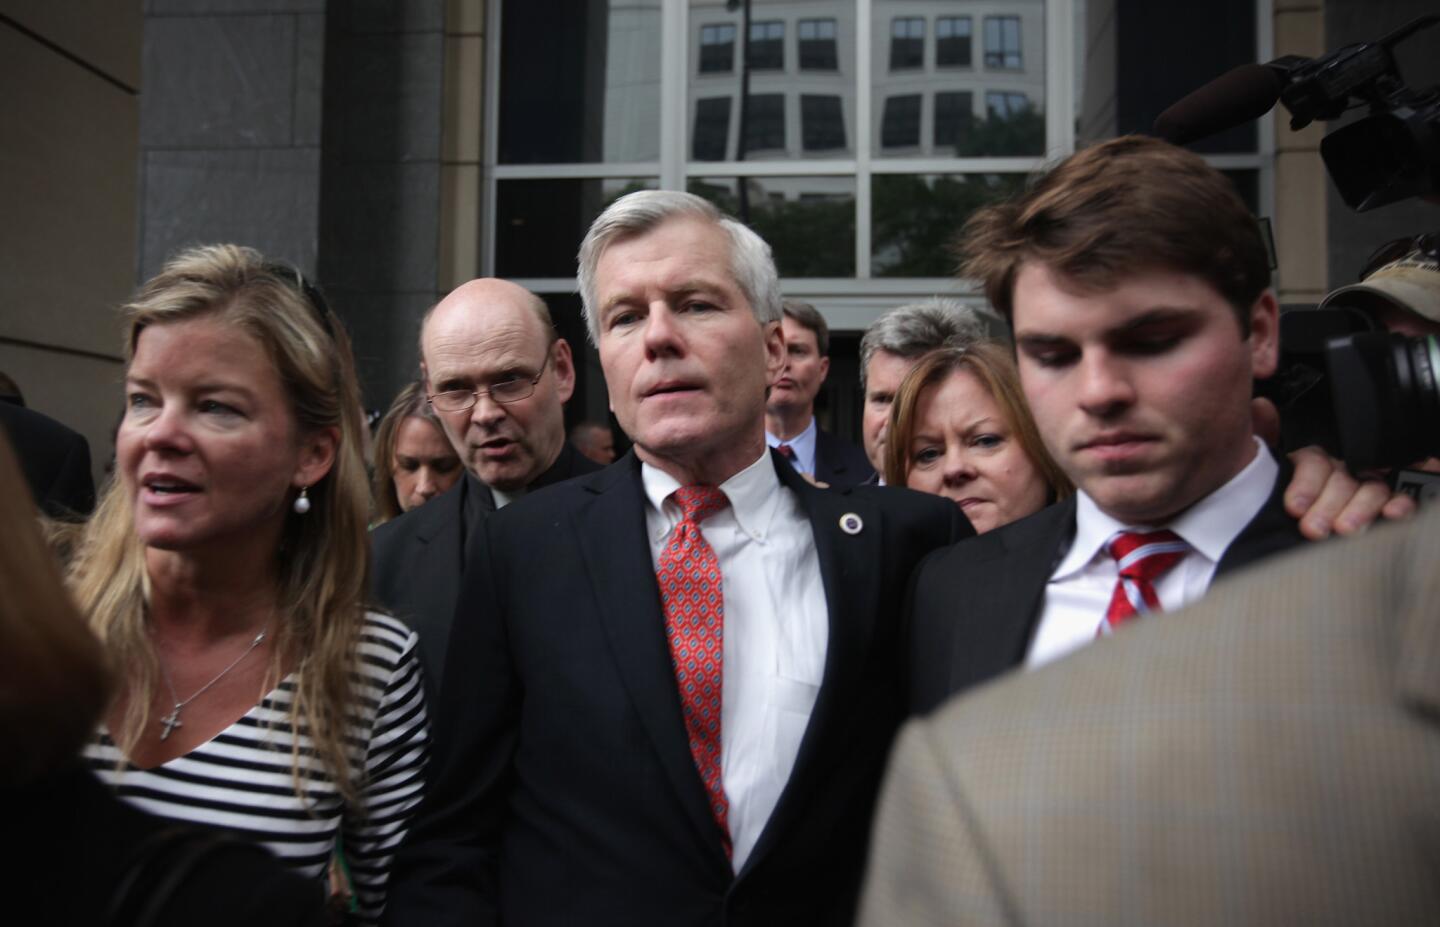 Verdict Reached In Corruption Trial Of Former Virginia Governor McDonnell And His Wife